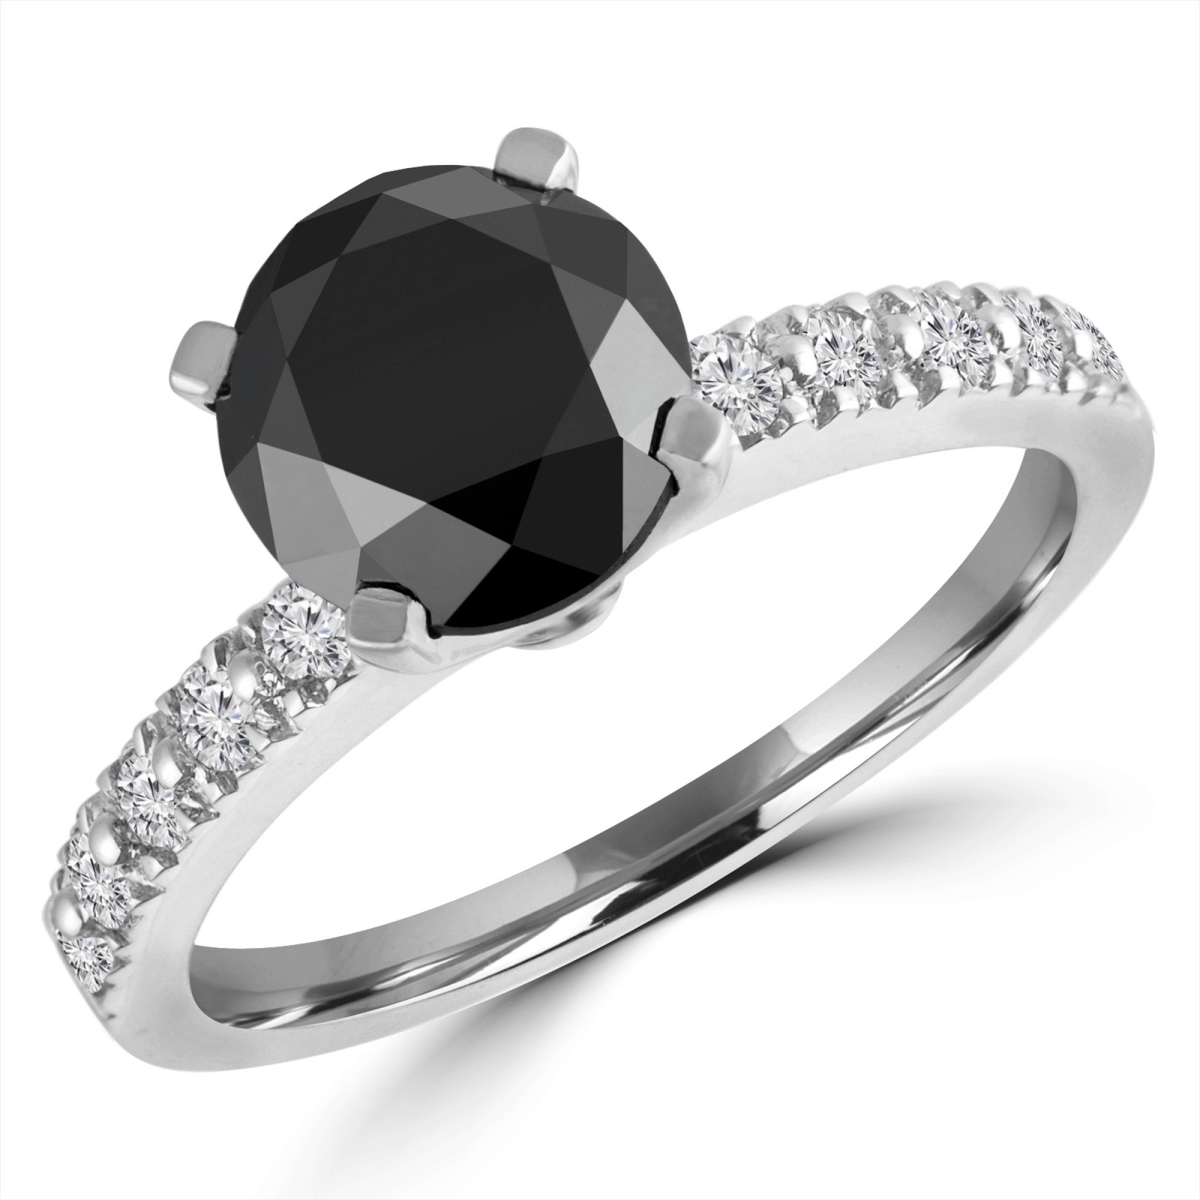 Picture of Majesty Diamonds MD180246-P 2.2 CTW Round Black Diamond Solitaire with Accents Engagement Ring in 14K White Gold